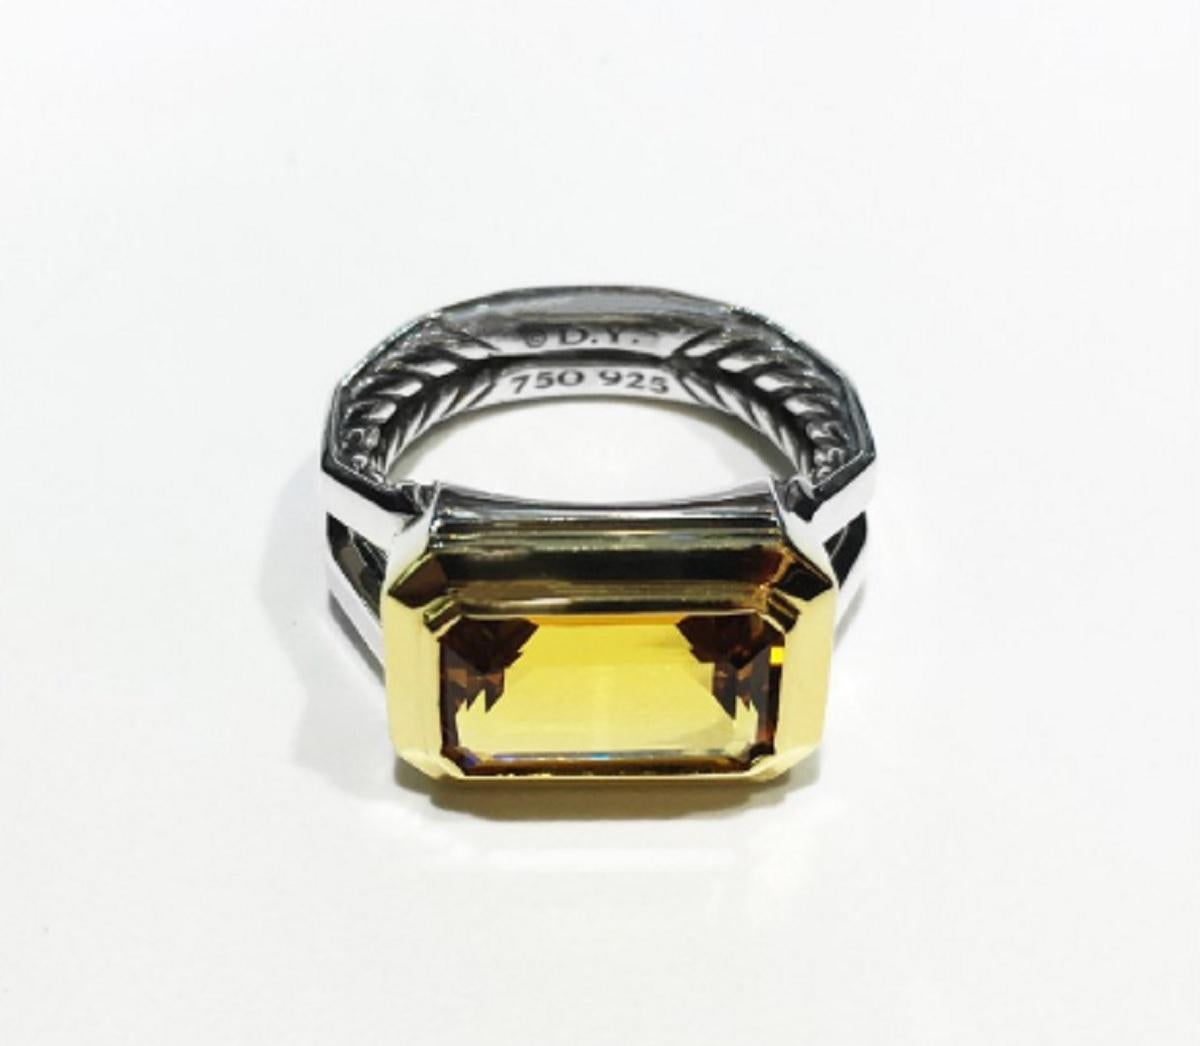 Brand: David Yurman
 Condition: Never Worn 
Metal: Sterling silver with 18K gold 
Gemstone: Emerald-cut citrine 13 x 8 mm 
Style: Split shoulders, tapered shank
 Ring size: 7
 Ring weight: 8.5 grams
 David Yurman pouch included
 RETAIL: $1950.00